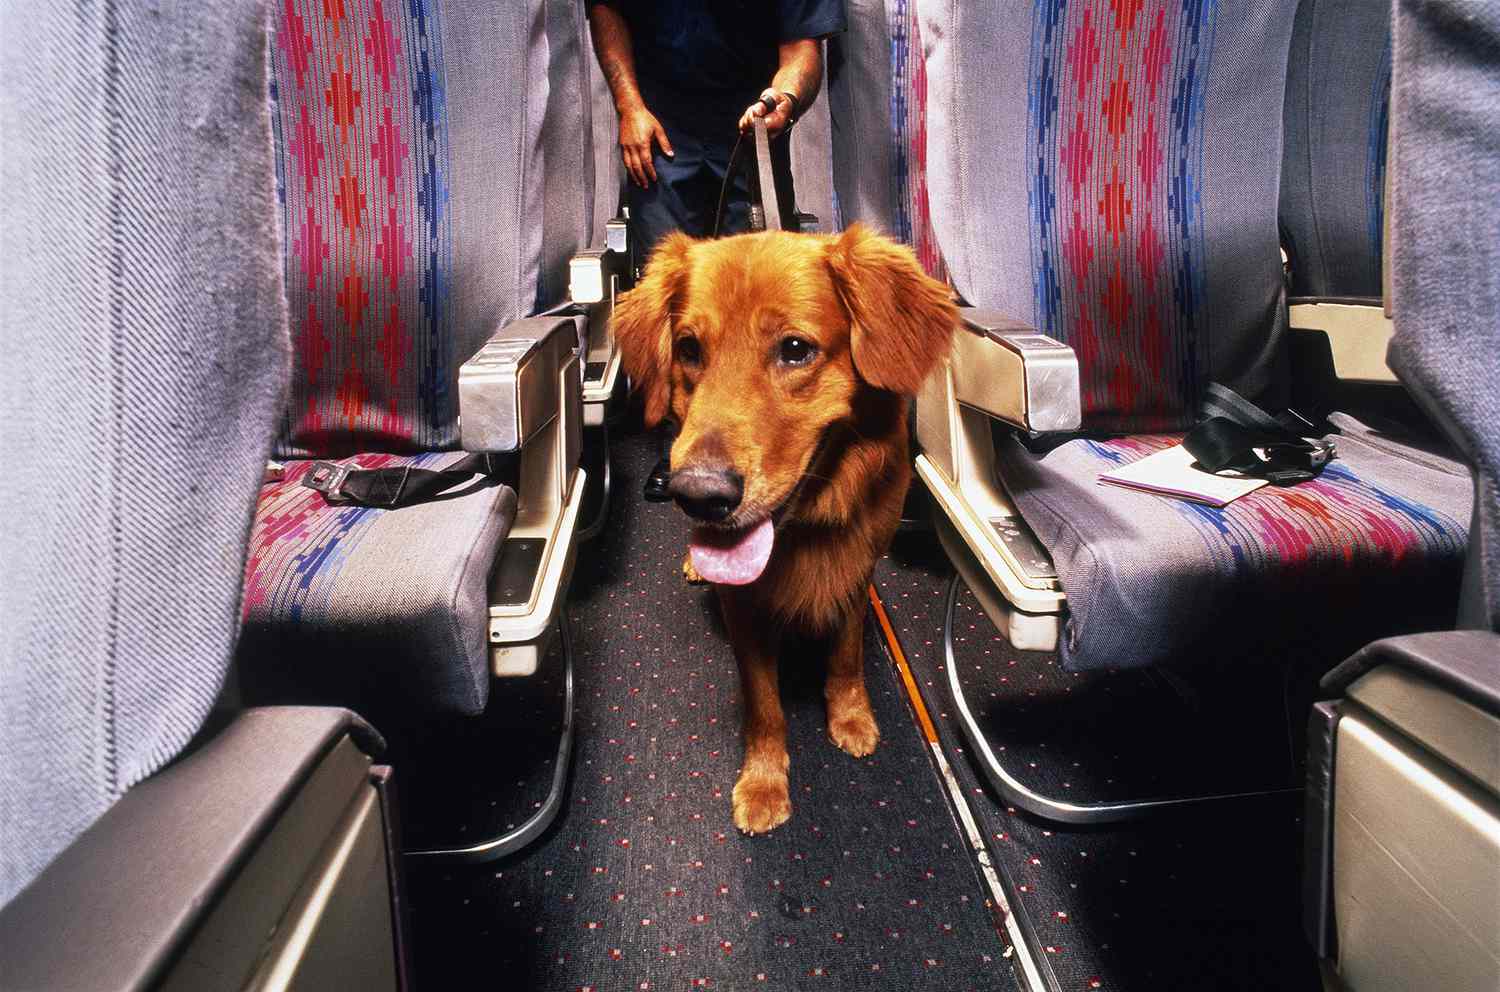 dogs on planes airline pet carrier united airlines dog policy united airlines pet travel best airlines united airlines pet policy flying with pets airlines that allow dogs flying with a dog airline dog carrier pet flights best international airlines pet carrier for plane traveling with dogs can dog dog carrier for plane dog travel carrier traveling with a dog on a plane dog flights dog flying plane united pet travel united dog policy flying with a large dog airlines that fly dogs pet airlines airlines that allow dogs in cargo best airline for pets air pets united airlines dog travel best international flights pet cargo airlines united airlines pets pets on planes united airlines flying with pets travel airlines the best airlines airlines that allow pets flights that allow dogs air travel with dogs best airlines to fly international best airline to fly with pets best pet carrier for flying airline pet policy united airlines pet policy international flights united airlines pet policy cargo best airline pet carrier pet travel airlines best airline for international travel united flying with pets flying a dog in cargo best airlines for dogs best airline to fly with best travels united dog travel flying with a dog united dog airline united airlines cargo pets airline dog policy dogs are allowed in flight best airline to travel with pets best airline to fly with dog united airlines dogs dog flight carrier flying pets in cargo united cargo pets united airlines pet carrier cargo pet travel united airlines dog cargo pet air travel best airline flights dogs on international flights pets allowed in flight airlines that allow large dogs dogs allowed on planes united airline pet cargo united fly with dog cargo flights for dogs pets are allowed in flight airlines that fly pets united airlines pet travel policy best airline to travel best air flights united pet travel policy best air line dogs allowed in flights best airline to fly pets in cargo pet cargo flights the best airlines to fly dog travel in flight dog travel airlines united dog cargo dogs that fly airlines that allow large dogs in cargo international pet travel airlines traveling with pet united airlines and pets pets on international flights best airline for large dogs united air pet policy pet flight carrier flying with a dog on united united airlines fly with dog airlines that allow pets in cargo airlines that fly dogs in cargo large dogs on planes pet air cargo pet carrier for air travel best airline for flying with dog best dogs for plane travel dog cargo airlines dog allowed in plane united pet policy cargo dogs that can fly on planes united airlines flying with a dog dogs traveling in cargo pets by air united airlines international pet policy best airline to travel with dogs best airline to fly on dogs that can travel on planes united pet carrier flying dogs internationally airlines flying dogs on united flights large dog airline carrier dog carrier for flying which airlines fly pets dogs in plane cargo pet cargo carrier dogs in cargo of planes airlines with best pet policy airlines and pets best international airlines to fly dogs and flying united airlines large dog policy best plane to fly internationally united airlines fly dogs airlines and dogs best airlines for pets international united flying with dogs which airlines fly dogs best flights for dogs travel with dog in flight airlines international flights united travel with dog best pet cargo airlines airline with best pet policy best airline to travel with best airlines for flying with dogs air travel dog carrier best flight in world united airlines dog flights dogs in cargo plane airlines allowing dogs in cargo united flying with a dog dog can travel in plane the best flight best airlines to fly in the world plane carrier for dogs airlines that fly large dogs pets in cargo airlines best airlines to fly for flying pets internationally best airline for dogs in cargo dogs carriers travel pet carrier airline pet traveling on plane pet travel in flight united airlines and dogs united dogs in cargo travel with dog united airlines united pets in cargo airlines that fly pets in cargo pets allowed on planes best airline for pets international travel dog air travel carrier flying large dog in cargo dogs and planes traveling with a large dog on a plane pet airlines international flying with a dog united airlines flying with dogs on united pet carrier for plane travel united dog travel policy any airlines air cargo for dogs pet carrier for flying airlines to fly with dogs dog is allowed in flight united pet flights airline cargo pet carrier flights that allow dogs in cargo united airlines best pets pet travel flights a dog flying best pet policy airline traveling with a dog united airlines united pets policy united dogs on plane dog air carrier which flight allows pets united airlines traveling with a dog travel with pets in flight planes for dogs air travel with large dog travel with large dog on plane airline dog carrier large flight with dogs allowed airlines you can fly with dogs best airline for international pet travel pet travel international flight united airlines with pets dog carrier on plane pets on planes policy united airlines international pet travel best airlines for international flights united airlines flying with dogs dog carrier plane travel large dog carrier for plane flying with dog united airlines international pet cargo airlines best flight lines dog as cargo on plane dogs you can fly with pet in cargo united airlines best airlines for dogs international united airlines dog travel policy airlines that allow dogs to fly united airlines dog policy cargo best travel flights flying with dog on united united air dog policy airlines that allow pet travel united airlines allow pets dog in cargo flight airline travel dog carrier dog airline cargo united flight dog policy best planes to travel on flight pet policy best airlines for flying with pets dog travel airline cargo pet cargo flights international pet carrier for international flights traveling with a dog on united airlines airlines flying with dogs air pet carrier pets by plane united international pet travel united flight with pet dog flight cargo united flying with a pet united airlines pet flight best airline to travel on united flight pet policy best plane flights traveling with a pet united airlines flights dogs allowed best air travel airline flights for dogs dogs that are allowed on planes air flights for dogs airlines that you can fly with dogs united airlines flying with a pet united pet flying policy flying on united with a dog dogs and flights united airlines traveling with a pet best flights for pets best airline to fly with large dog traveling with dog in cargo united airlines and pet travel pet cargo plane plane with dog united air pet best airlines to fly dogs internationally flying with pets pet flights airline pet carrier best airlines pet cargo airlines pet airlines airline pet policy best airline for pets air pets airlines that allow pets best airline to fly with pets best pet carrier for flying pet travel airlines travel airlines cargo pet travel pet air travel best airline pet carrier best airline to travel with pets flying pets in cargo pets allowed in flight pet cargo flights pets are allowed in flight airlines that fly pets best airline to fly pets in cargo pet flight carrier airlines that allow pets in cargo which airlines fly pets airlines and pets pet air cargo pet carrier for flying pets by air pet travel flights pet travel in flight airlines with best pet policy pets in cargo airlines airlines that fly pets in cargo which flight allows pets airline with best pet policy travel pet carrier airline flight pet policy any airlines airlines that allow pet travel best airlines for flying with pets air pet carrier airline cargo pet carrier best pet policy airline best flights for pets american airlines pet policy american airlines pet cargo pet friendly airlines american airlines pets american airlines pet travel american airlines flying with pets hawaiian airlines pet policy us airlines pet travel major airlines american airlines cargo pet american airlines pet fee airlines that allow pets in cabin fly airlines hawaiian airlines pet cargo may airlines pet friendly flights pet policy american airlines carry on pet american airlines pet in cabin pet flight cost american airlines pet cargo cost pet transport airlines american airlines pet transport pet friendly airlines in cabin can airlines american airlines in cabin pet pet air transport hawaiian airlines pet travel airline pet fees in cabin pet carrier carry on pet carrier best pet friendly airlines pet flight service carry on pet pet cargo american airlines airlines that accept pets flying with your pet american airlines pet policy cargo american airlines and pets american pet cargo american airlines pet travel cargo hawaiian airlines pets cost of pet transport by air american airlines pet travel policy pet in cabin american airlines hawaiian airlines pet in cabin american pet travel main airlines american airlines policy on pets american airlines pet cost air travel pet carrier american airlines checked pet american airlines pet policy in cabin carrying pets in flight pet in cabin airlines flying with a pet american airlines american air pet policy best airlines credit cards american airlines carry on pet policy best airlines for pets in cabin cargo pet carrier hawaiian airlines flying with pets pet flight transport pet friendly airlines usa american airlines pet in cabin policy hawaiian air cargo pets flying with pet american airlines pet policy for american airlines hawaiian airlines pet carry on american airlines pet flights american airlines allow pets american airlines traveling with a pet american flying with pets american airlines pet in cargo hawaiian air pet policy american air pet cargo pet airfare flying with pets in cabin american airlines flying with a pet american cargo pets american airline pet cargo policy cargo pet friendly american airlines pet transport cargo flight with pet in cabin airline pet transportation services pet cabin airlines which airlines carry pets american airlines pet check in cost to fly a pet pet air travel service flights that allow pets in cabin hawaiian airlines pet cargo cost airlines accepting pets in cargo american airlines cargo for pets in cabin pet american airlines hawaiian airlines pet carrier carry on pet fee airline cabin pet carrier pet travel in cabin american pet in cabin cabin pet american airlines airlines all best airline for pets in cargo pet policy on american airlines airline carry on pet carrier american airlines pet friendly american airlines cargo pet policy american airlines pet service checked pet american airlines flying with my pet travelling with pets in flight which airlines transport pets hawaiian airlines pet policy cargo cargo pets american airlines pet friendly airlines cargo airlines t airlines that fly pets in cabin american airlines pet cargo flights pet air transportation services american airlines service pet policy pet transport american airlines friendly airlines pet policy hawaiian airlines airline pet cargo services airlines that accept pets in cargo airlines that accept pets in cabin american airlines air cargo pets hawaiian cargo pets best airline to fly with pets in cabin airlines that carry pets airlines that allow in cabin pets air travel with pets in cabin flights for pets cost pet can fly airlines pets in cargo airlines that allow carry on pets american in cabin pets american airlines flights with pets flying your pet in cargo pet carry in flight hawaiian pet cargo flights with pet cargo pet flying policy flying with pets hawaiian airlines american air cargo pets cost of pet travel on airlines american airlines pet policy cost air cargo pets transport service pets in cargo american airlines american airline pet travel cost american air pets pet transport by flight best airline for pet travel in cabin airlines that check pets airlines and pets in cabin pet friendly transport fly cabin air cargo pet carriers us airlines pet policy flying a pet in cargo fly with your pet in cabin pets carriers best airline for flying with pets cabin carrier pet flight fees the best pet carrier for airline travel pet friendly air travel best pet carrier for airline travel in cabin pet flights fly in cabin american airline pet cost airline pet travel policy airlines that carry pets in cargo american pet airlines checked pets airlines pet carrier cabin hawaiian airlines pet transport american airlines checked pet policy pet travel carriers for airlines check in pets airline cost of traveling with pet by air american airline pet cabin us air pet policy airlines that allow pet in cabin flying with your pet in the cabin hawaiian airlines pet travel policy airline travel with pets in cabin pet airline services cost to travel with pet on airlines best airline carrier pet carrier for airline cargo american airline pet flight american airlines pets on flights flying with pets american pet air flights airlines to travel cost of pets on airlines american airline pet cargo cost air flights for pets best airline for pet transport pet airlines usa pet travel airlines cost airlines that allow pets to fly airlines that allow pets to fly in cabin best airline for pet travel in cargo hawaiian air pet travel hawaiian airlines flying pets pet air usa american airline pet policy cargo pet carriers for in cabin air travel airlines flying pets cargo airlines and pet travel us airlines pet travel air pet cargo american airline pet carry on policy pet air service pets in airline cabin pet air carrier service airlines that will fly pets travel air pet carrier american airline pet carrier policy airline flights for pets pets flying as cargo pet air cargo carriers american airlines and flying pets air pet transportation pets and air travel pet flying fees airline carriers for pets pet airline travel cost pet friendly airlines airlines that allow pets in cabin flying with pets airlines that allow pets pet flights pet friendly flights best airline for pets pet airlines airline pet policy pet friendly airlines in cabin pets allowed in flight best airline to travel with pets pet travel airlines best pet friendly airlines airlines that accept pets pet air travel pets are allowed in flight best airline to fly pets in cargo airlines that allow pets in cargo airlines that fly pets flying with your pet best airlines for pets in cabin pet friendly airlines usa which flight allows pets american airlines allow pets flights that allow pets in cabin airlines with best pet policy cargo pet friendly pet cabin airlines which airlines carry pets airlines accepting pets in cargo carry on pet fee which airlines fly pets airlines that accept pets in cabin best airline for pets in cargo airlines that allow in cabin pets airlines that allow pet travel pet friendly airlines cargo pet travel flights best pet policy airline airlines that allow carry on pets airlines that allow large dogs in cabin airlines that allow dogs airlines that fly pets unaccompanied airlines that allow dogs in cabin flying with a dog dog friendly airlines american airlines dog policy air canada pet policy airlines that allow dogs in cargo traveling with cats on a plane international taking dogs on planes flying with large dog in cabin flights that allow dogs airlines that allow cats in cabin flying with a dog in cabin travel with dog dog on plane traveling with pets air canada dog policy dogs on airplanes pets on planes airlines that allow emotional support dogs most pet friendly airlines cost to fly a dog traveling with a dog on a plane international travel with pets emotional support animal international flight dog flights airlines that fly dogs pet friendly airlines europe airlines that allow large dogs in cabin 2023 united airlines pet policy international flights dogs flying on planes flying with cats in cabin best airlines to ship pets klm dog policy flying with your dog air canada flying with pets air canada pet policy international flights airlines that ship dogs best airlines for dogs dog friendly flights pet friendly international airlines lufthansa dog policy taking pets on a plane flying with a cat internationally air travel with dogs airlines that fly pets unaccompanied 2023 dogs on planes rules best airlines to fly with pets dogs on international flights flying with a large dog internationally airline dog policy dogs are allowed in flight pitbull friendly airlines cat friendly airlines flights that allow dogs in cabin best airlines to ship pets internationally air france dog policy flying internationally with dog bringing a dog on a plane airlines that allow rabbits traveling with dogs internationally pet friendly airlines 2023 klm pet travel reviews turkish airlines dog policy pet flight ticket airlines that accept emotional support dogs cat in cabin international flight international airlines that allow pets in cabin dog airline flying with a small dog pitbull friendly airlines 2023 lufthansa pet policy in cabin flying with animals flying with my dog airlines that allow large dogs airlines that accept dogs american airlines service dog policy airline that allows large dogs in cabin flying dogs in cargo dogs allowed on planes traveling with your dog most dog friendly airlines american airlines international pet policy airlines that allow small dogs in cabin best airline to fly with dog turkish airlines pet reviews airlines allowing emotional support animals airlines that allow big dogs in cabin airlines that allow pets in cabin uae international pet travel airlines airlines that allow rabbits 2023 best airline to fly with service dog lufthansa pet travel reviews airlines that allow cats pets on international flights airlines that take dogs airlines that allow dogs in cabin europe do airlines allow pets airlines that allow emotional support animals dogs allowed in flights taking my dog on a plane airlines that let you fly with dogs dog friendly airlines 2023 traveling with a cat internationally animal flights airlines that allow large dogs in cargo airlines that allow guinea pigs dog in airplane cabin best airlines for pets international flying with a large dog 2023 taking your dog on a plane rabbit friendly airlines dogs in cabin airlines dog breeds not allowed to fly flying with your dog in the cabin rules for flying with a dog small dogs on planes airlines that allow birds in cabin cheap flights with pets animal airlines best way to fly with a dog airlines that allow birds flights that allow cats airlines that let dogs fly in cabin pitbull friendly airlines 2023 airlines that transport dogs flying pets internationally cat international flight airlines that allow puppies in cabin dog friendly airlines europe dog only airline pet airlines international airlines that allow dogs in cabin international dog in cabin international flights air canada pet cargo reviews international flights that allow dogs in cabin airlines that allow rabbits in cabin dogs on airplanes rules cheapest way to travel with a dog american airlines pet policy international international travel with cat airlines that allow cats in cabin international dog travel airlines united airlines international pet policy best airline to travel with dogs airlines that allow medium dogs in cabin airlines accepting emotional support dogs airlines pets in cabin turkish airlines pet cargo reviews pet friendly airlines canada dogs on flights rules air france pet travel reviews best airline for pets international travel traveling internationally with a cat pet airline ticket pet safe airlines best dog friendly airlines most pet friendly airlines international travel with your pet international travel with cat in cabin airplane travel with dog airfare for dogs flying overseas with dog dog international flight cost price to fly a dog turkish airlines pet travel reviews international airlines that allow french bulldogs in cabin pet airways international flights with dogs in cabin american airlines pet cargo international flying pugs internationally dog friendly airlines in cabin pug friendly airlines emirates pet cargo reviews international pet cargo airlines air canada pet fee lufthansa service dog policy air france pet fee air canada service dog policy which airlines fly dogs best flights for dogs airlines that allow dogs in seats airlines that fly dogs in cargo transport dog on plane emotional support dog international flight pet fees for airlines animal friendly airlines flying with dog internationally best airline for international pet travel large dog friendly airlines plane tickets with pets flying internationally with a cat dog allowed in plane pet cargo flights international international travel with service dog flights for dogs prices american airlines bringing a dog klm pet policy international flights pet in cabin international flight international airlines that allow dogs in cabin airlines that take pets lufthansa pet policy international travel flights for dogs in cabin do airlines allow dogs bringing my dog on a plane international airlines that allow rabbits flights with pets in cabin best airlines for flying with dogs klm service dog policy air france pet policy international flights airlines that fly dogs in cabin dogs not allowed on planes taking dogs on international flights best airlines for dogs international airlines that allow emotional support dogs in cabin pet friendly planes which airlines accept dogs taking a small dog on a plane airlines allowing dogs in cargo dog friendly airlines international flying pets overseas which airlines transport dogs which airlines allow rabbits bird friendly airlines dog air ticket price international taking dog on airplane air france traveling with pets klm pet transport reviews cat flights flying internationally with a rabbit transatlantic pet travel which airlines ship dogs airlines that will fly dogs airlines that allow big dogs dog friendly planes airlines that allow hamsters taking dog on international flight airlines that accept emotional support animals pet travel international flight flying cats internationally european airlines that allow dogs taking pets on international flights airlines that allow service dogs united airlines allow pets pets allowed on planes easiest airline to fly with pets which airlines allow hamsters klm pet cargo reviews which airlines allow cats dogs in business class pets in business class airlines that accept dogs in cabin airlines to fly with dogs dog is allowed in flight flying internationally with cats best airlines for dogs in cargo international flights that allow pets in cabin air canada pet carry on flying animals on planes klm pet policy international best airline to ship dogs turkish airlines emotional support dog best airlines to fly dogs internationally flying with cats internationally pet only airlines airlines that take dogs in cargo airlines that transport pets pet carrier for international flights best airline to fly pets internationally international pet shipping airlines airlines that allow dogs on lap airlines that allow rabbits in the cabin united airlines pet travel international airlines that let you fly with cats american airlines international pet travel airlines with dogs in cabin cheap flights that allow pets airlines you can fly with dogs transatlantic flight with dog small dogs allowed on planes japan airlines pet in cabin pet friendly airlines best airline for pets dog friendly airlines pet airlines pet travel airlines best airlines for dogs best airline to travel with pets air travel with dogs best pet friendly airlines pet air travel dog airline pet friendly airlines 2023 dog friendly airlines 2023 dog travel airlines best airline to travel with dogs best dog friendly airlines worst airlines best airlines in the world 2023 new airlines 2023 worst airlines in the world best airlines best travel world best airlines 2023 air lines best airlines 2023 top airlines news travel best airline in the world 2023 pet air your trip travel airlines the best airlines best and worst airlines top airlines in the world 2023 travelling in 2023 best to worst airlines top airlines 2023 world's best airlines 2023 worst airlines 2023 worst airlines in the world 2023 airlines 2023 air travel 2023 2023 best airlines the best airline in the world 2023 travel news 2023 the best travel best to worst airlines 2023 best and worst airlines 2023 airlines best to worst best and worst airlines in the world worlds worst airline new airlines in 2023 dog air the best airlines in the world 2023 world top airlines 2023 pets by air airline 2023 top worst airlines best airlines in 2023 worst to best airlines best airlines of 2023 airlines and pets best airline in 2023 airlines from best to worst airlines new air travel in 2023 pet travel 2023 worst airliner top worst airlines in the world animals traveling on airlines airliner for animals airlines and dogs airlines animals best airlines in world 2023 dog in air worst airliners 2023 top airlines 2023 airlines best travel airlines best world airlines 2023 the best airlines 2023 airlines in 2023 airlines lines best airline for dogs 2023 2023 air travel 2023 travelling airline news 2023 airlines report beste airlines 2023 travel 2023 news airlines trip the world best airline 2023 worst air line animal air travel 2023 airline 2023 new airlines trip with pets the best and worst airlines best dogs for airline travel airlines to travel best is airlines air animal pet airlines pet friendly air travel dogs and air travel airline with animals airlines and animals worst airlines to travel with air travel with your dog pets and air travel airlines and pet travel